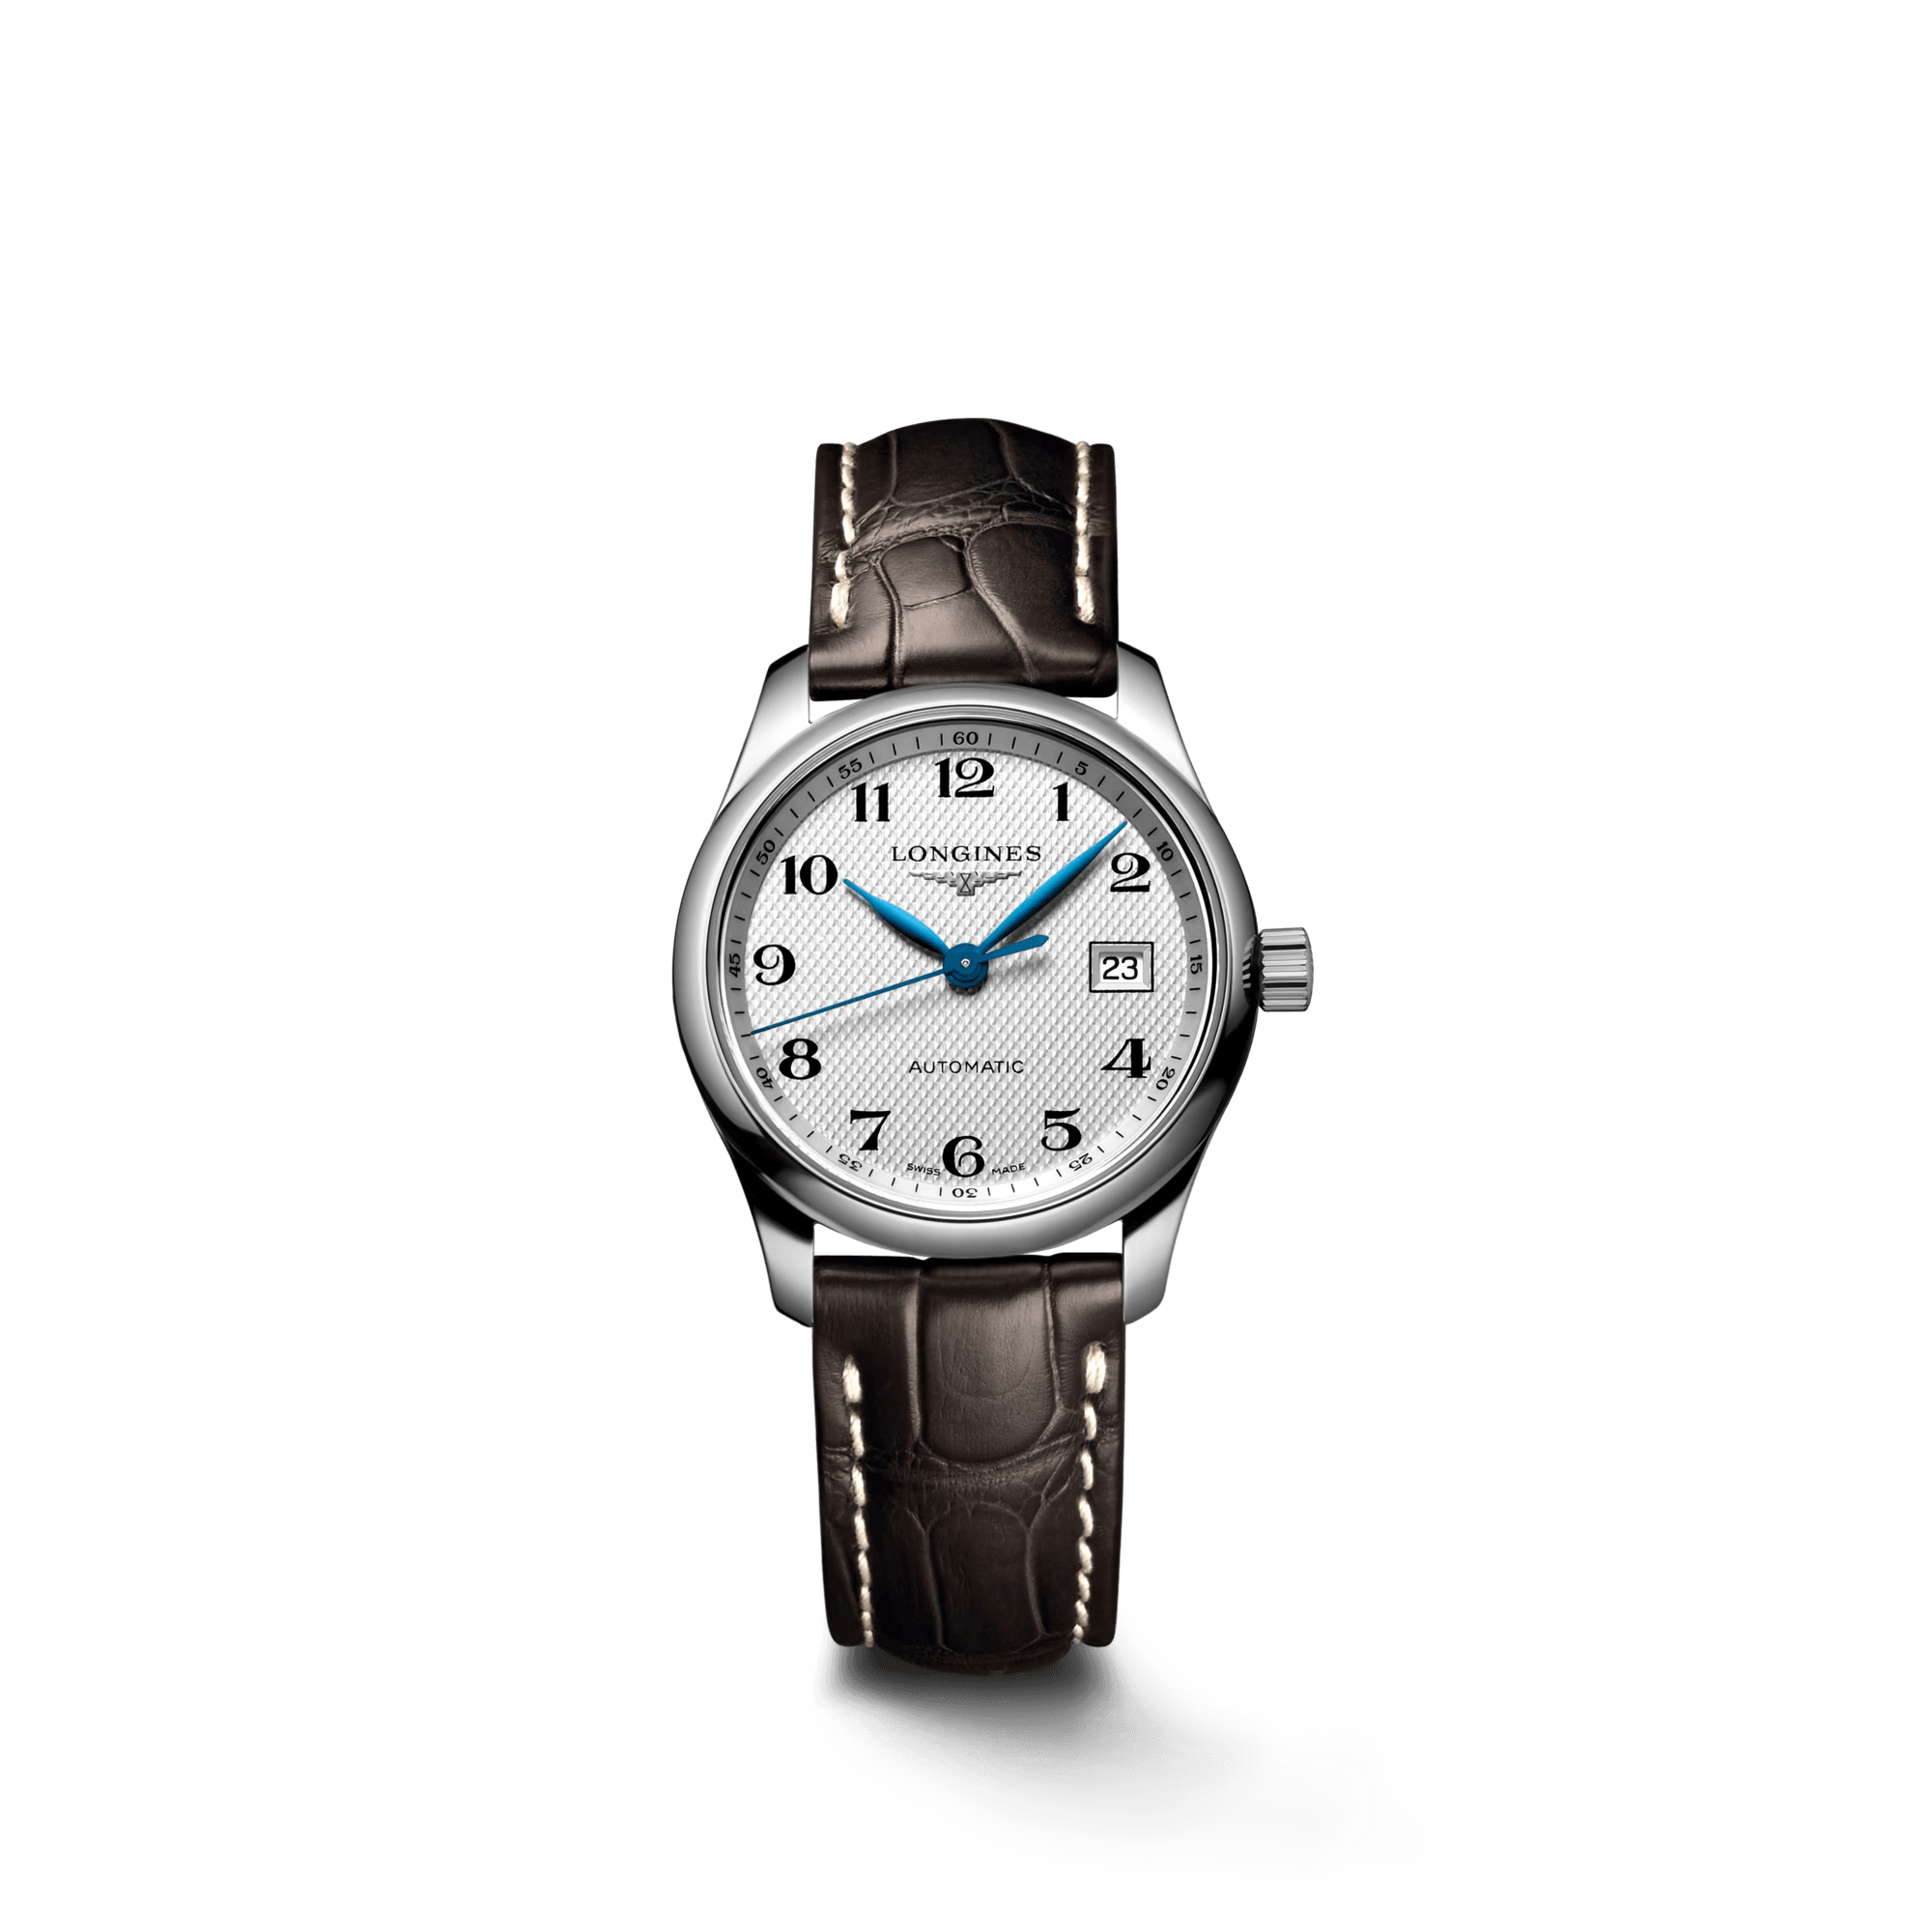 The Longines Master Collection Automatic Women's Watch L22574783